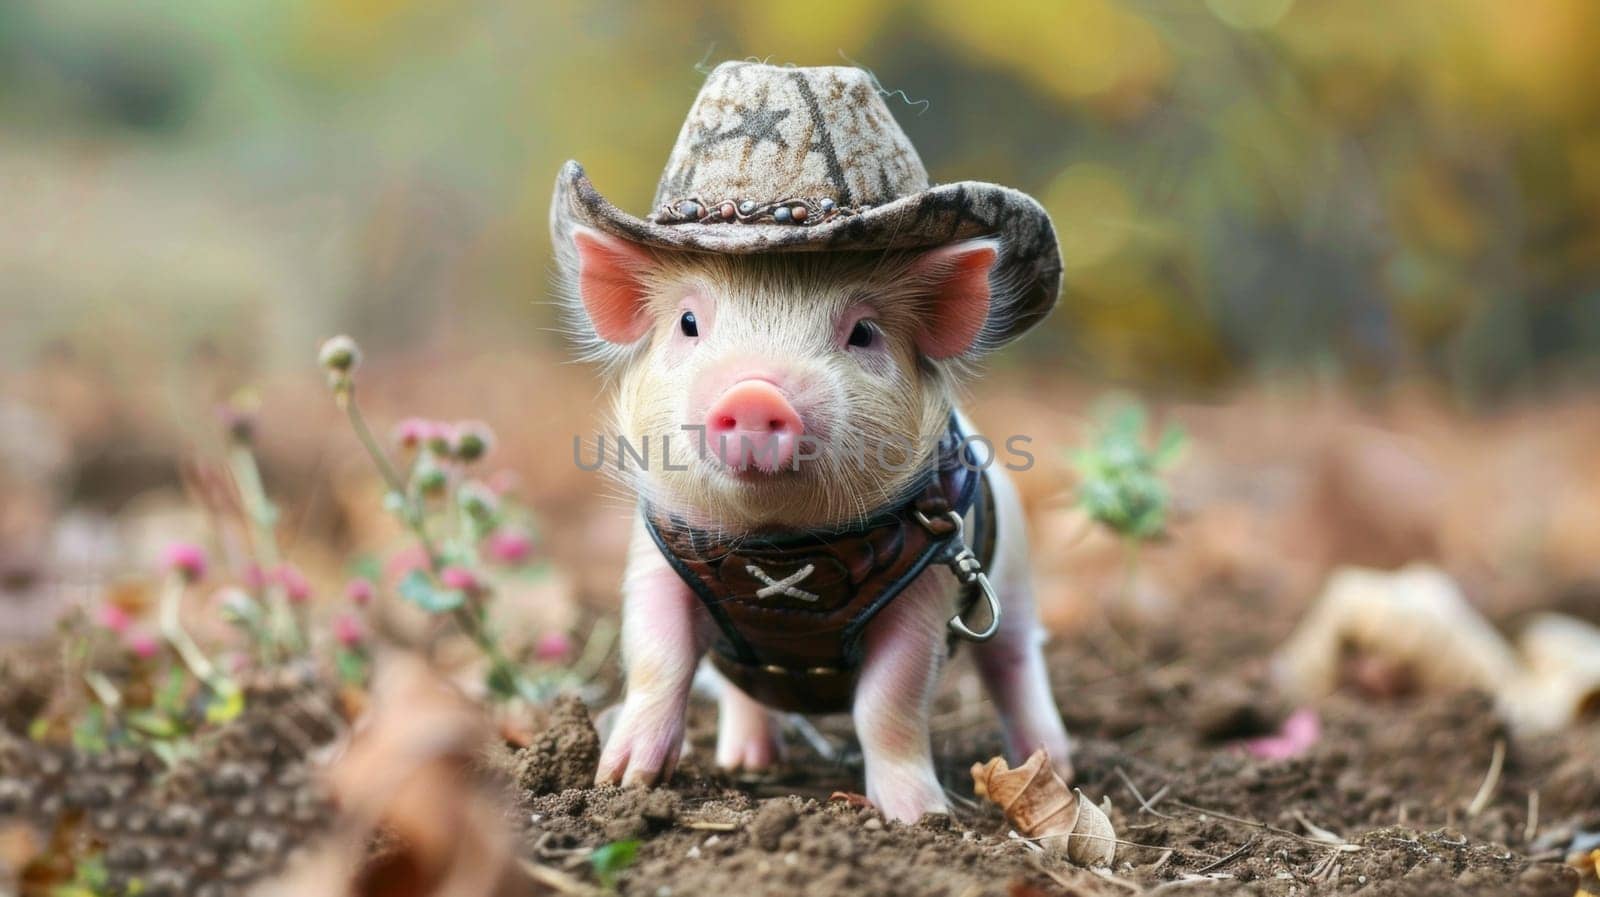 A small pig wearing a cowboy hat and riding on the ground